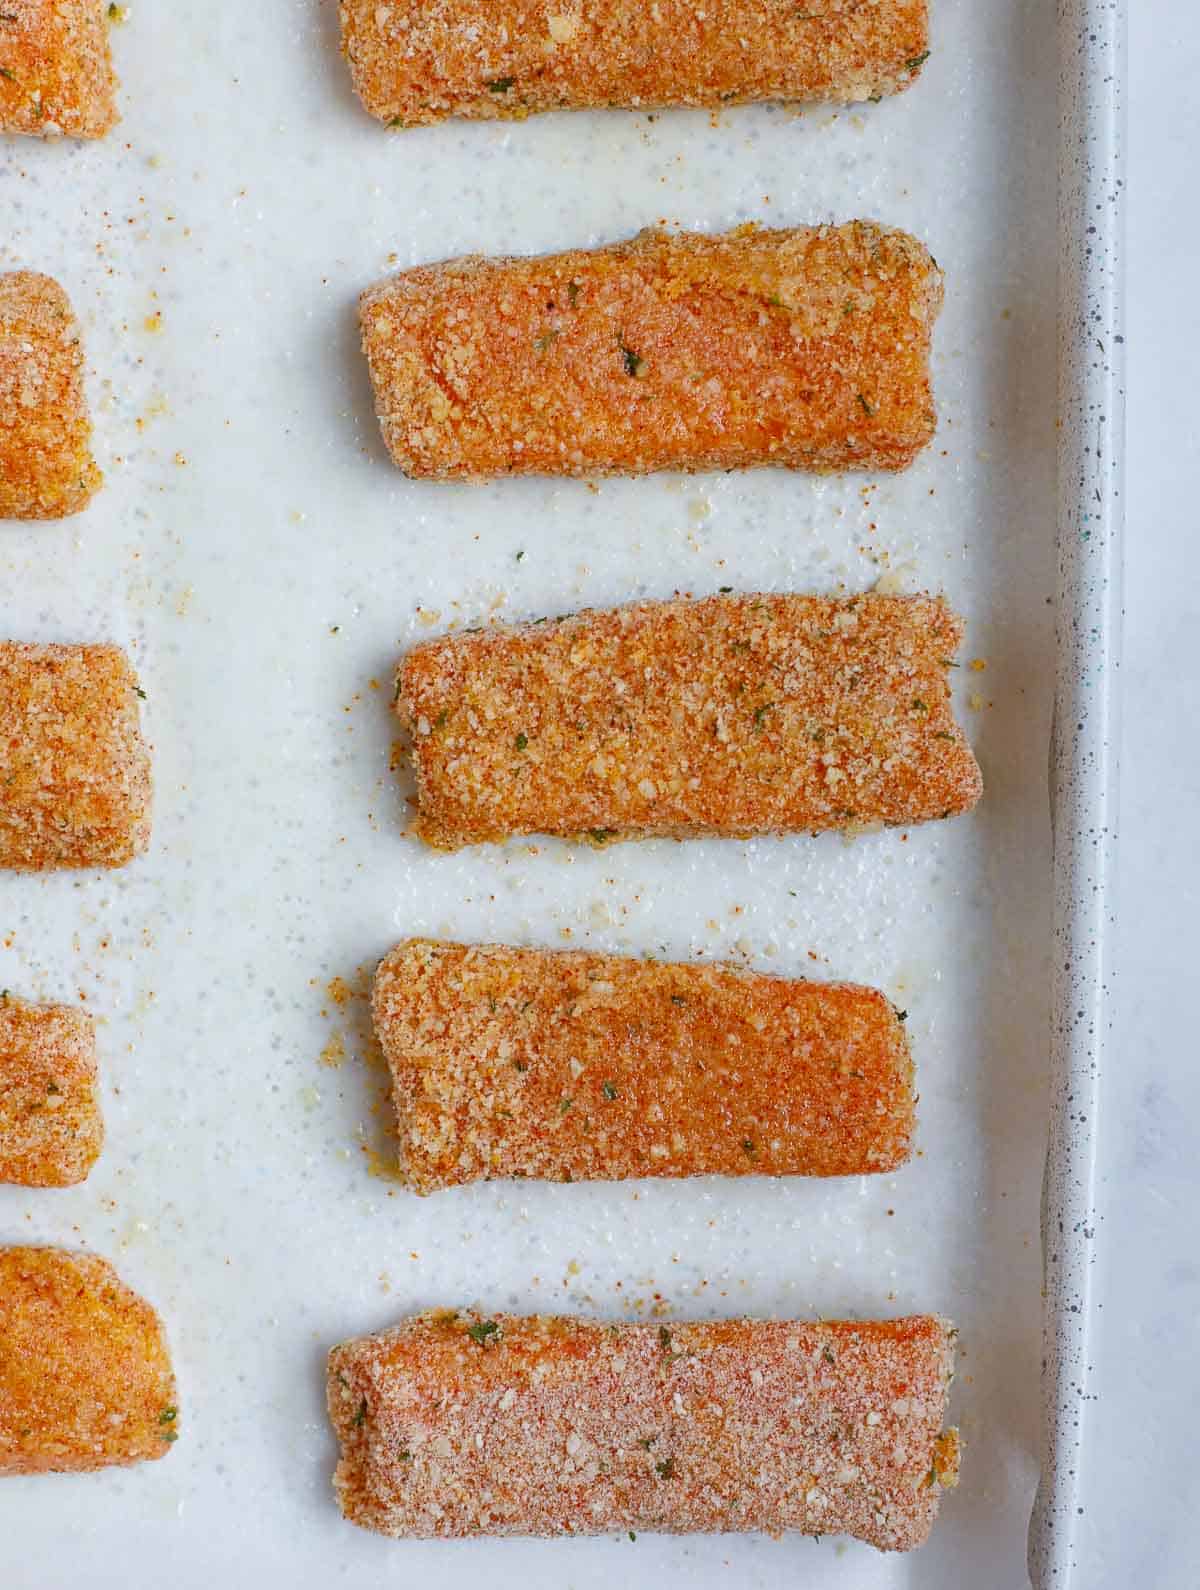 Salmon fish sticks ready to be baked on a tray.